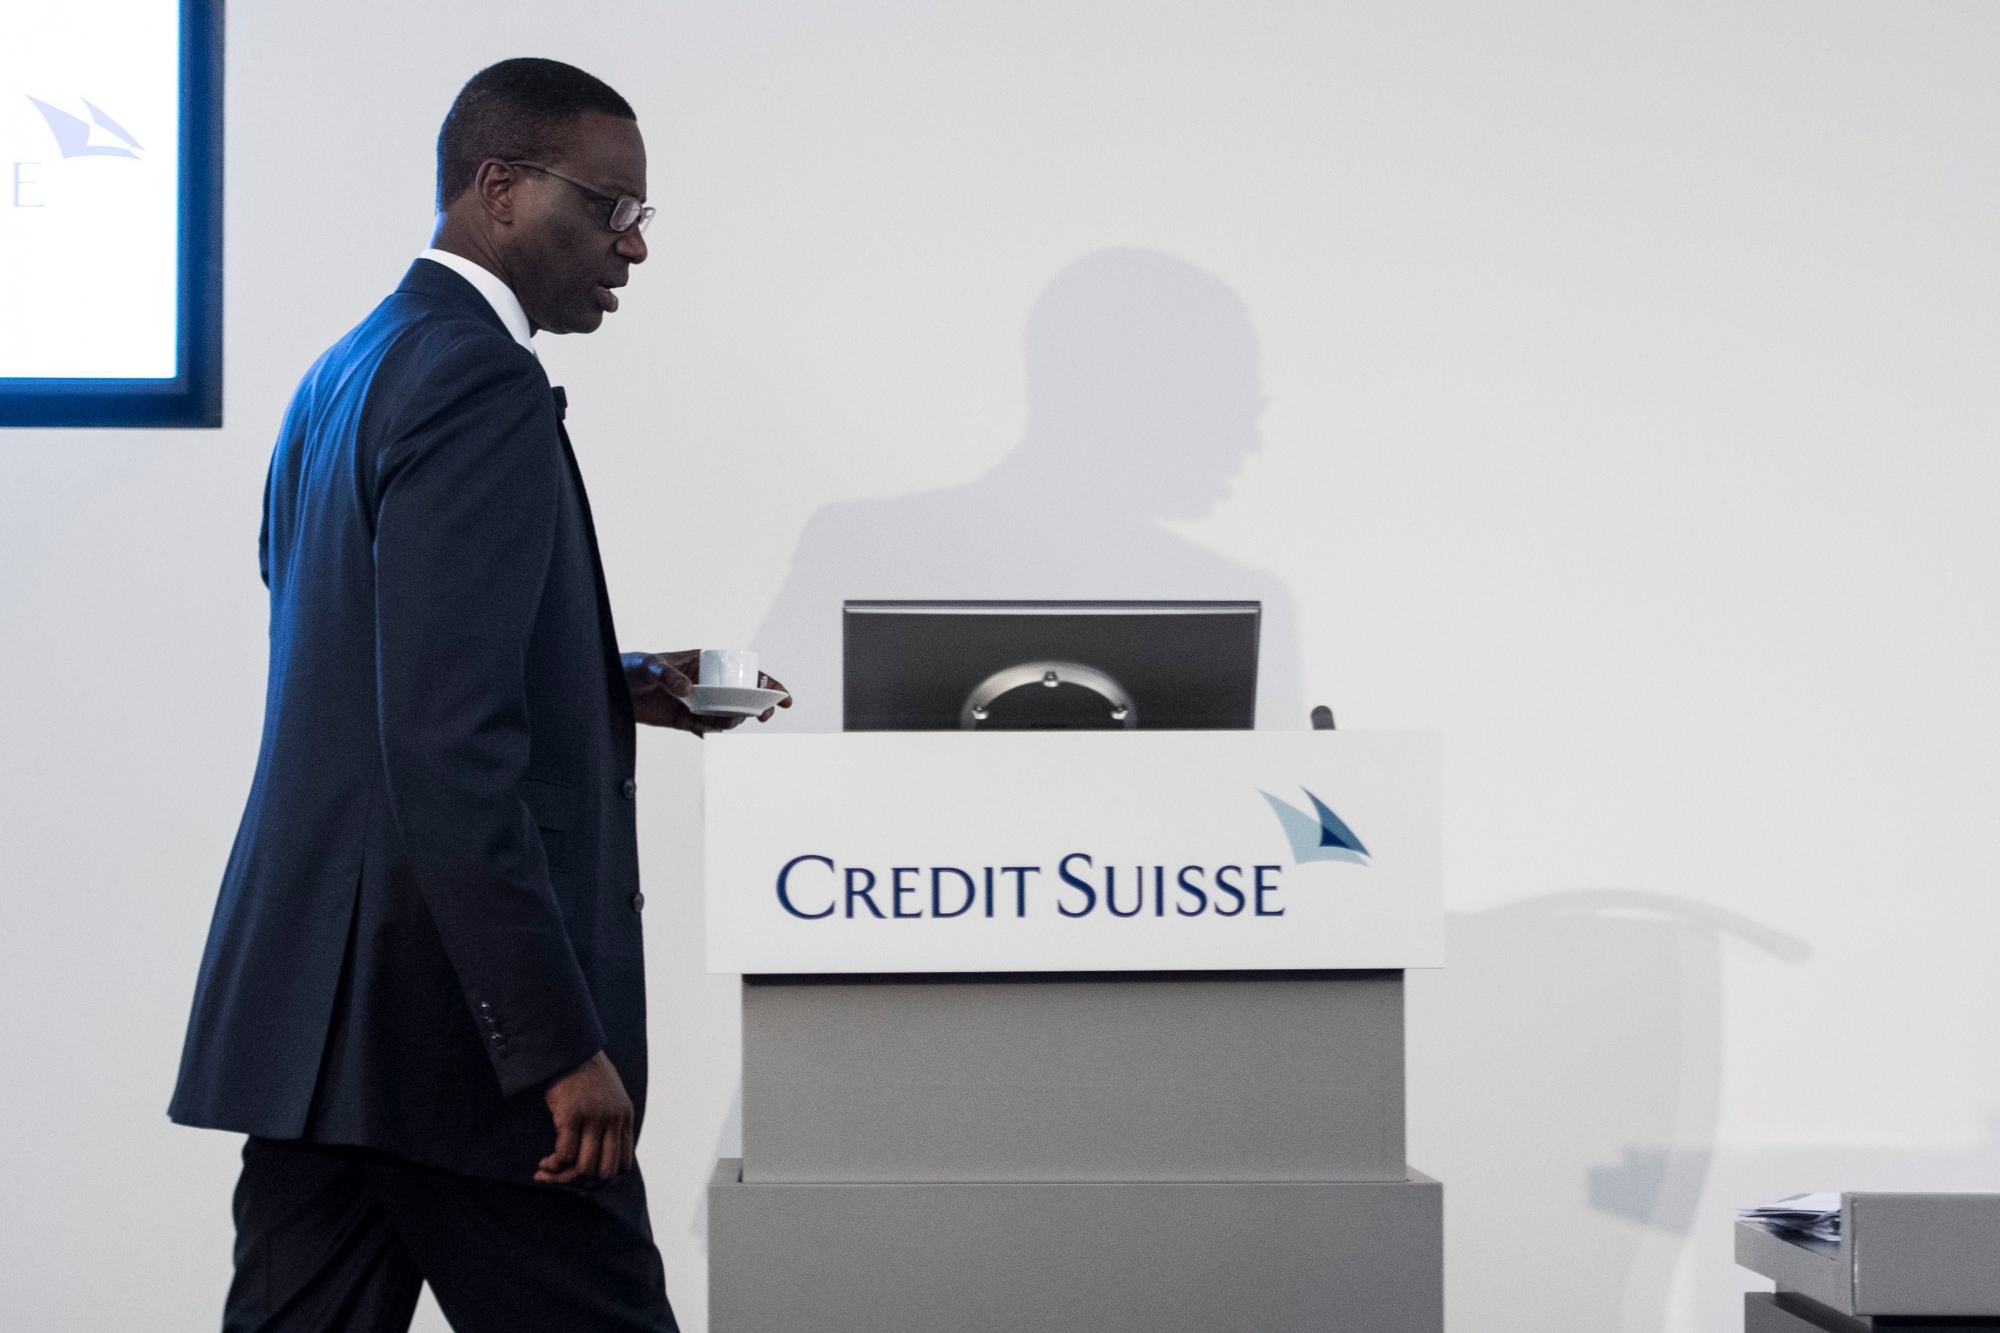 Tidjane Thiam, CEO of Swiss bank Credit Suisse, is pictured during a press conference in Zurich, Switzerland, Tuesday, May 10, 2016. Switzerland's second-biggest bank on Tuesday reported a net loss of 302 million Swiss francs ($311 million) in the three months through March, compared with a profit of 1.05 billion francs a year ago. (KEYSTONE/Ennio Leanza) SCHWEIZ BANK CREDIT SUISSE